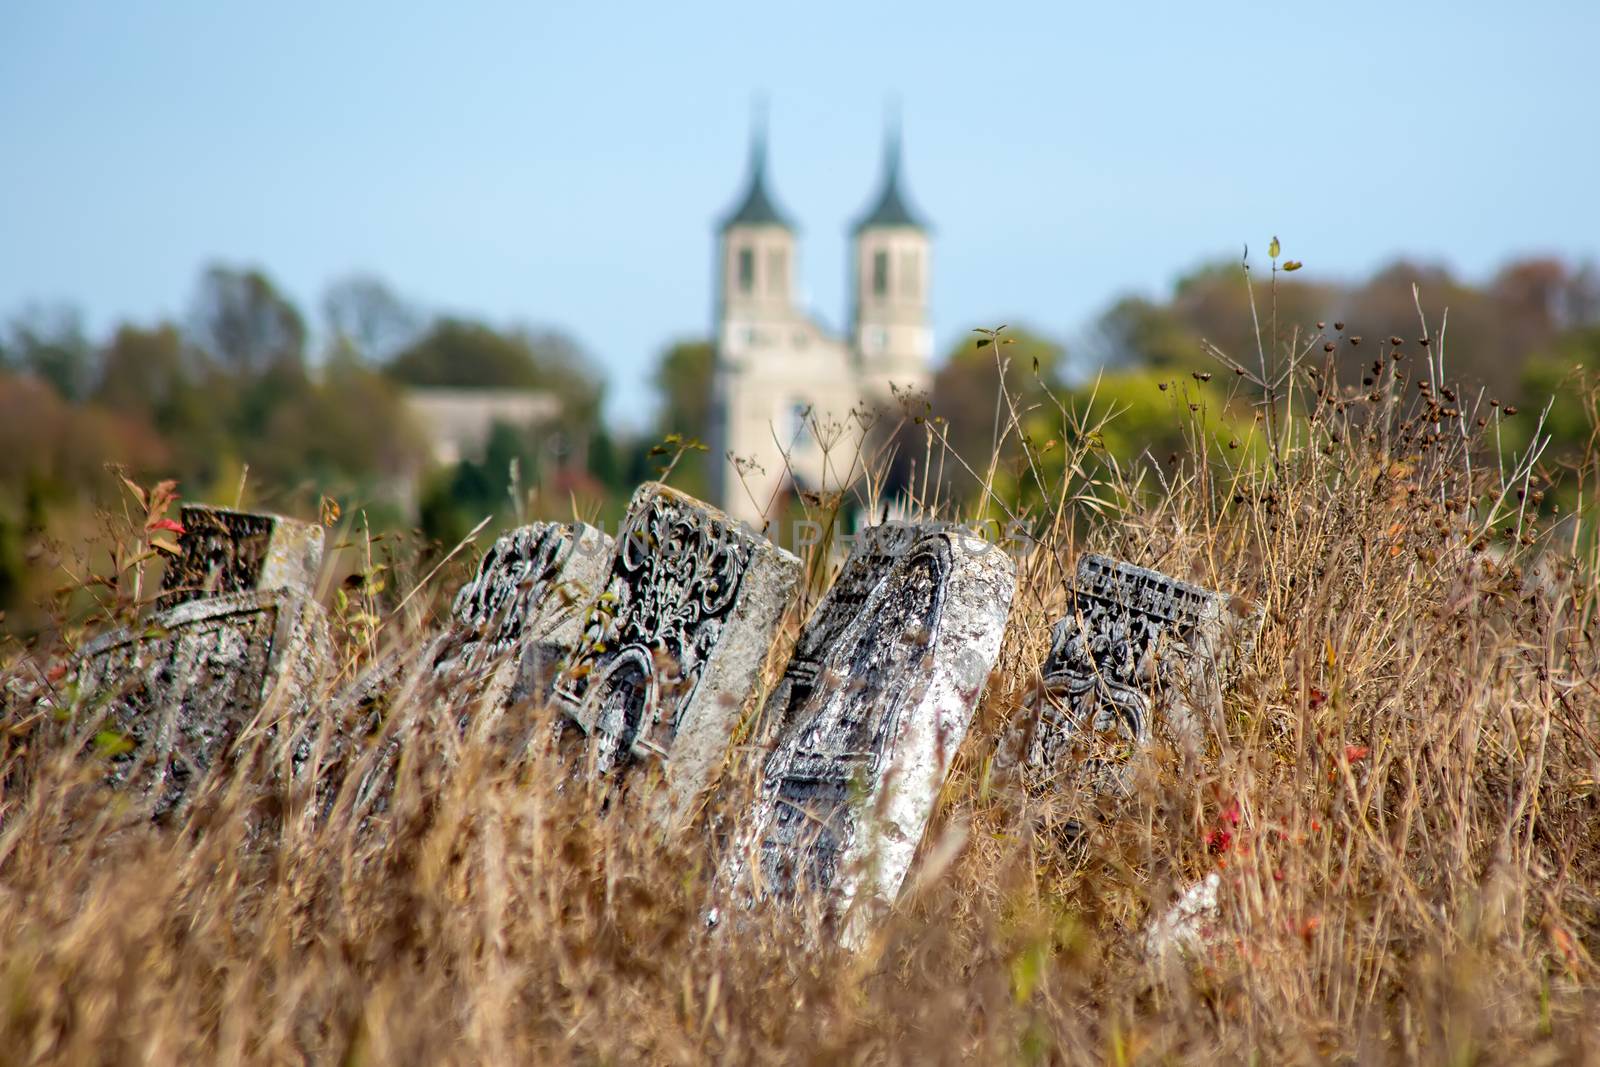 Graveyard plates in grass. Against the background of the church. by 977_ReX_977